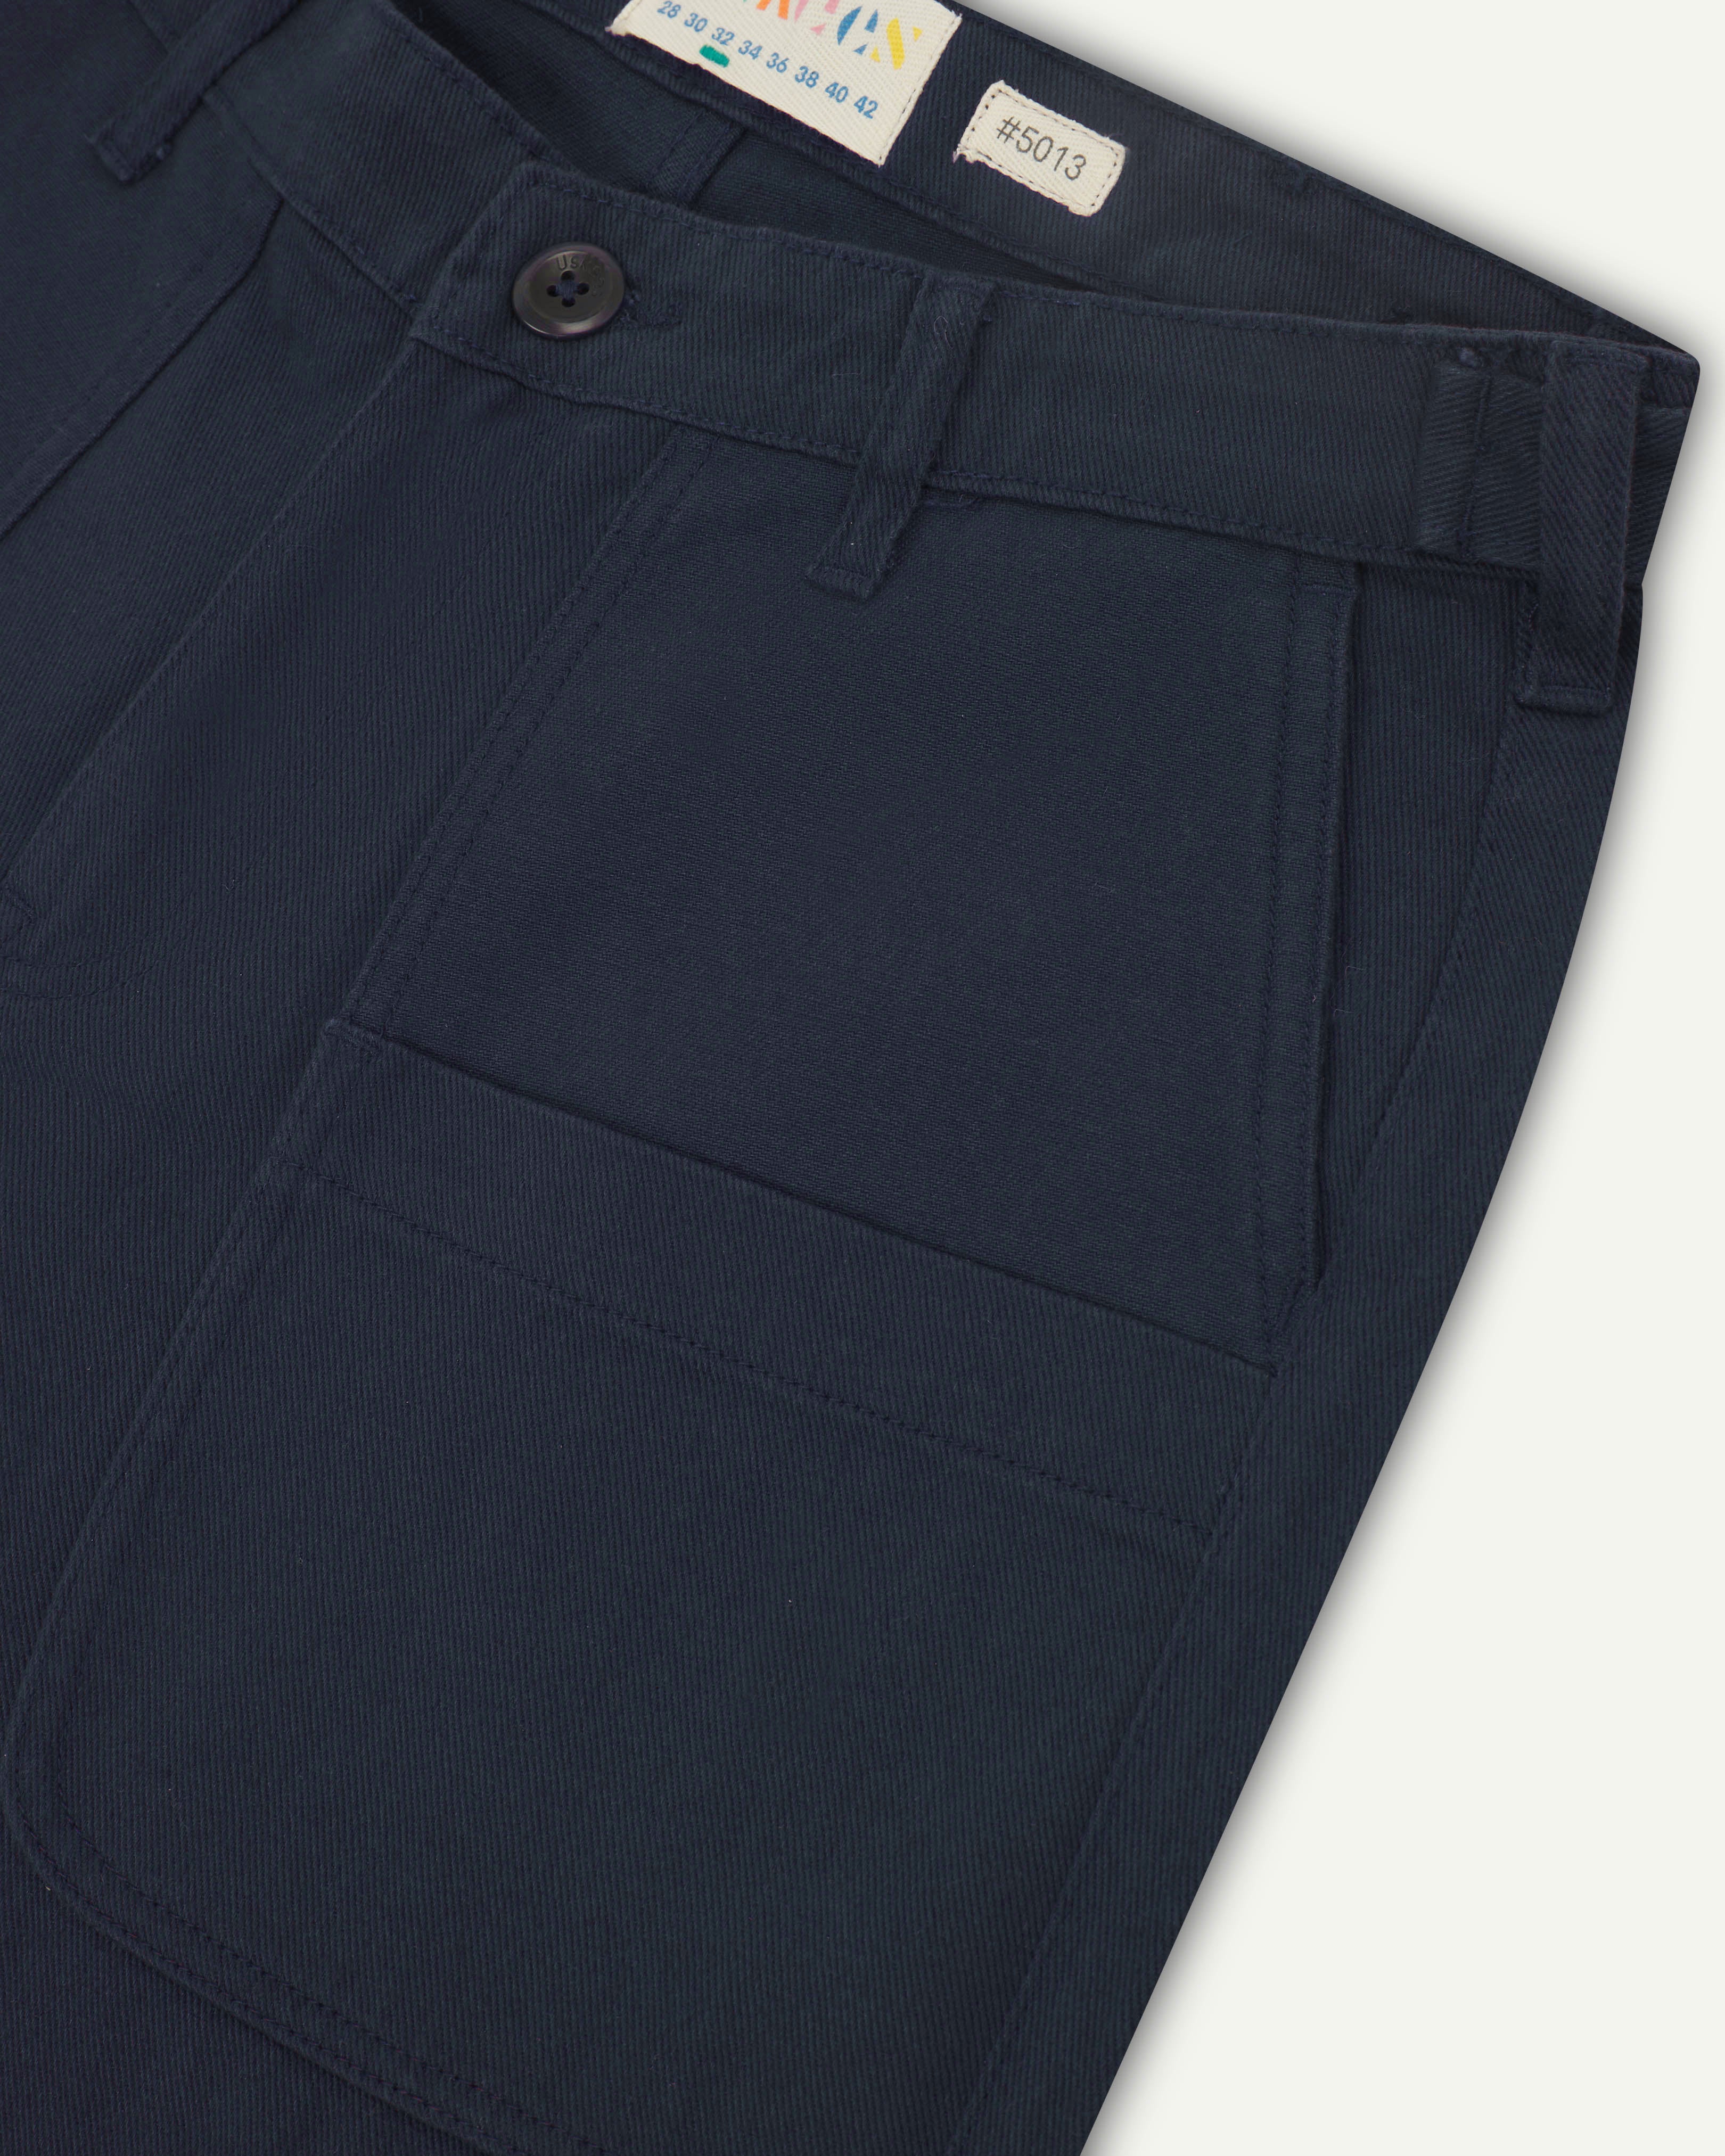 Close up shot of uskees #5013 drill men's trousers showing pocket and waistband detail